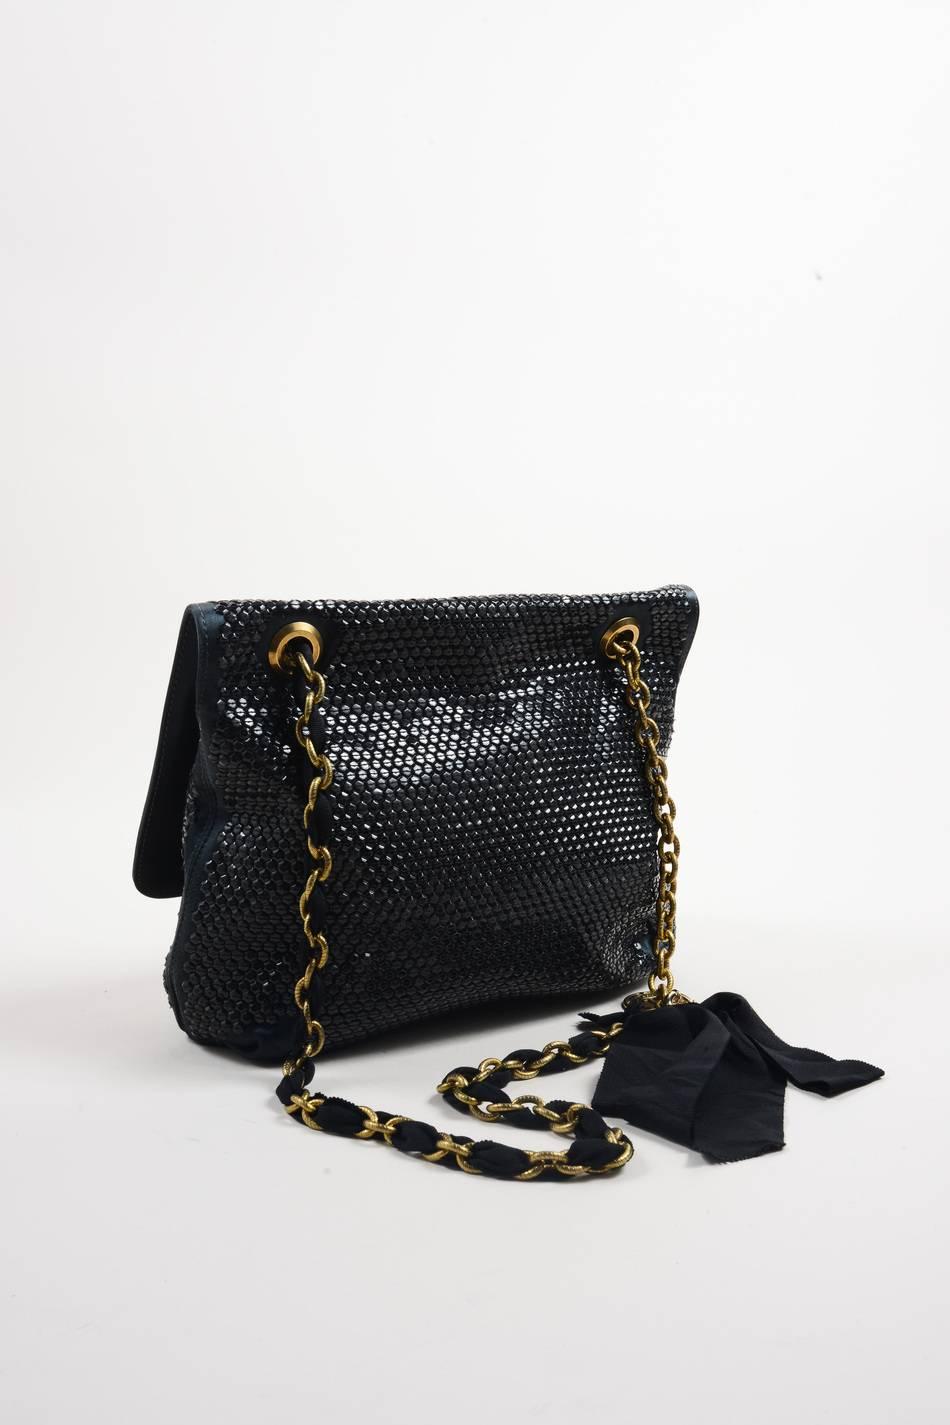 Retails for $4,459. Satchel bag is embellished throughout with black sequins. Secures with front turnlock closure. Gold tone metal and ribbon chain straps have two floral details, ribbon bow, and gold tone medallion. Straps can be worn as double, or